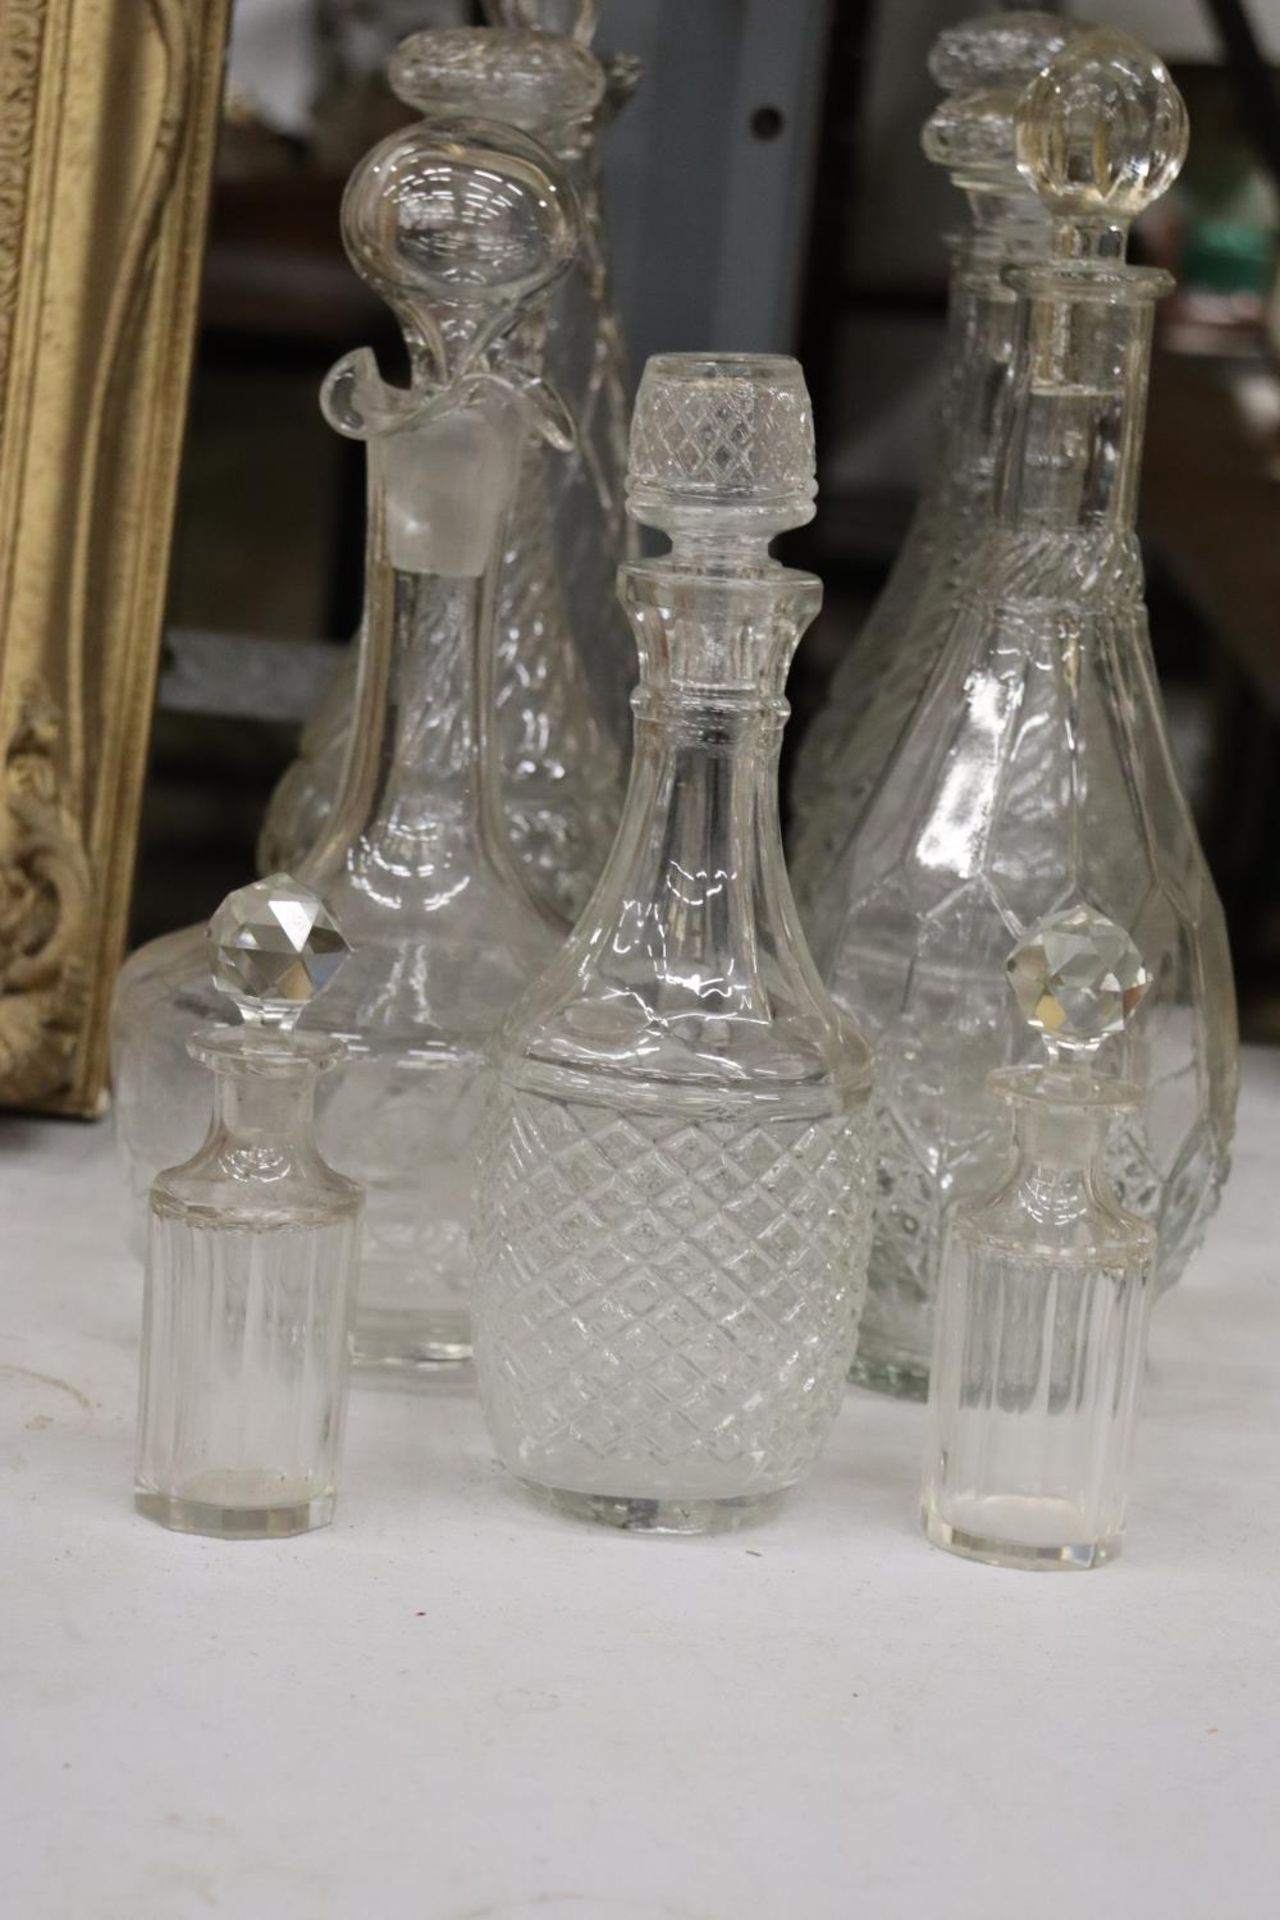 A QUANTITY OF VINTAGE DECANTERS - 9 IN TOTAL PLUS TWO SCENT BOTTLES - Image 2 of 4